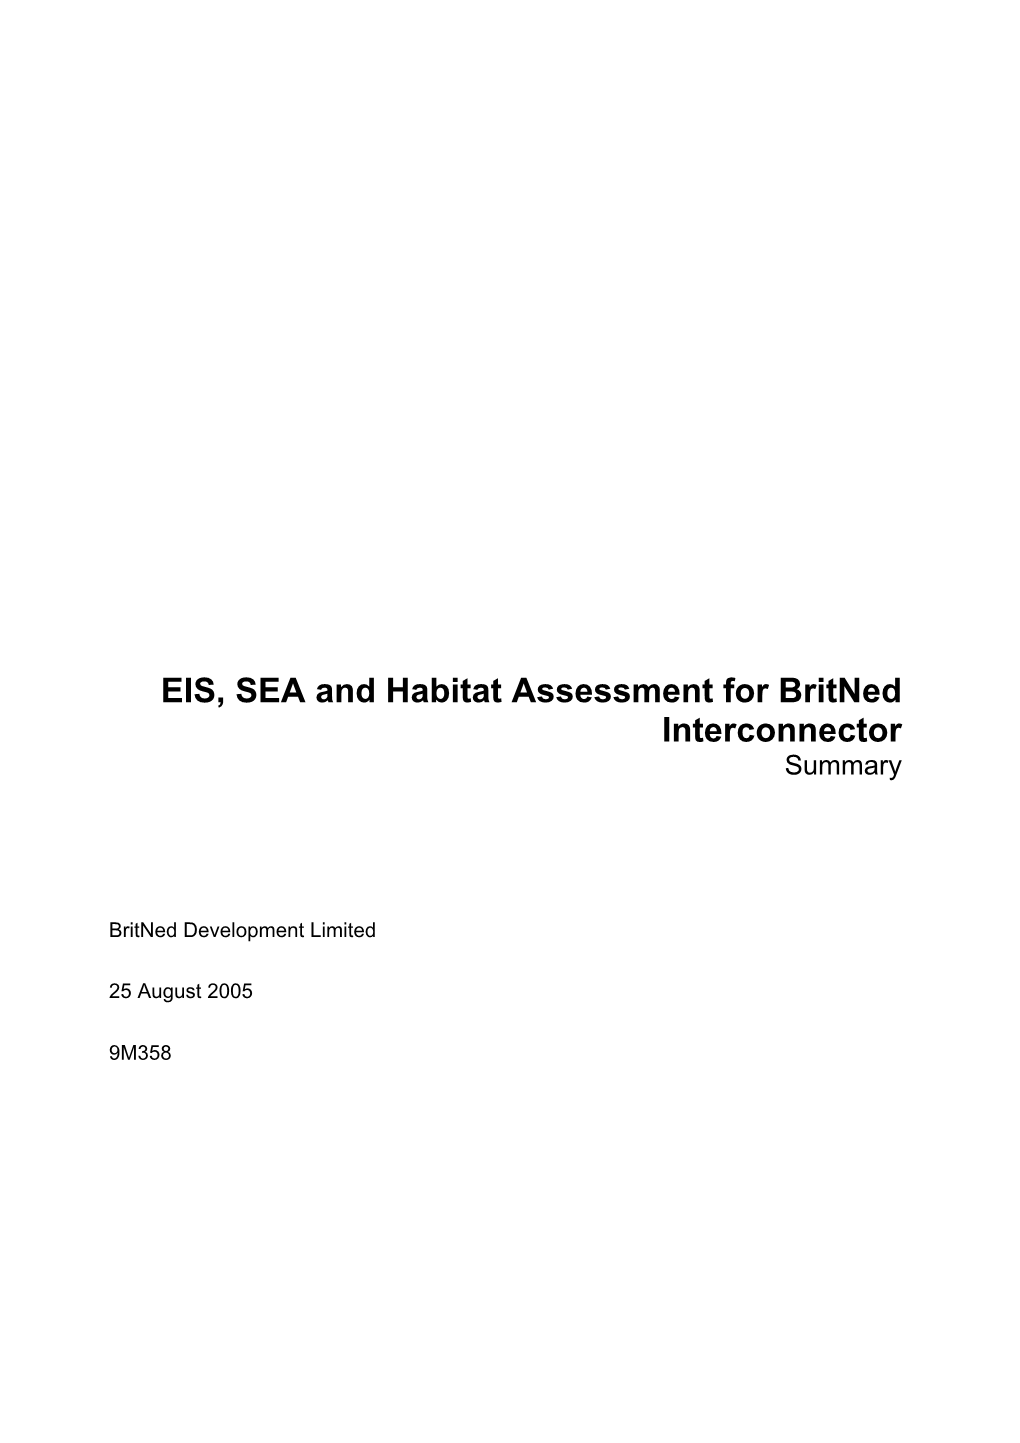 EIS, SEA and Habitat Assessment for Britned Interconnector Summary